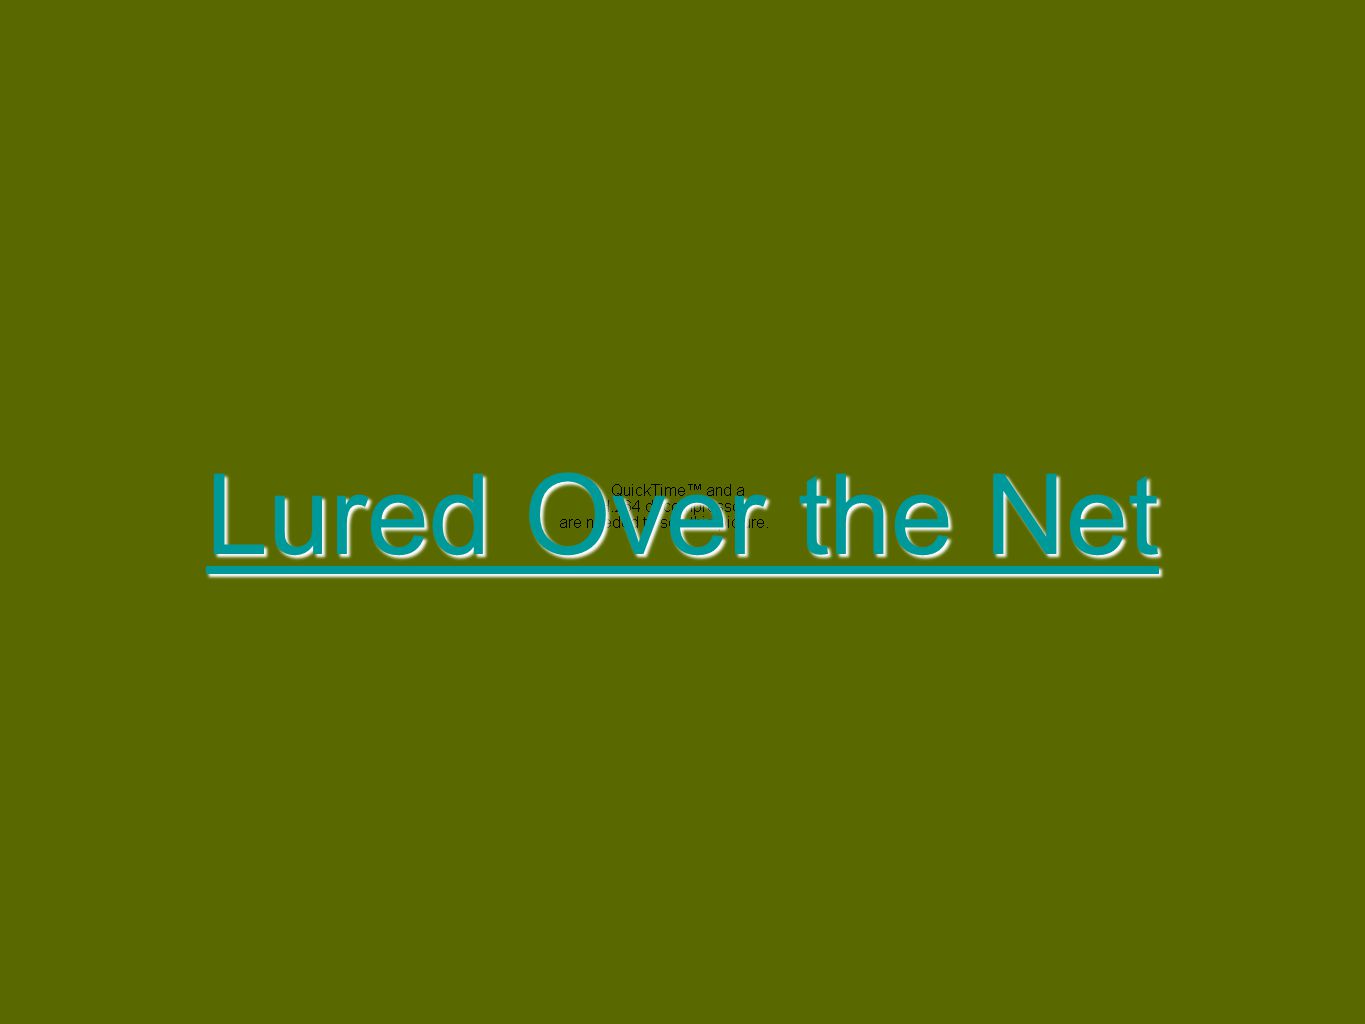 Lured Over the Net